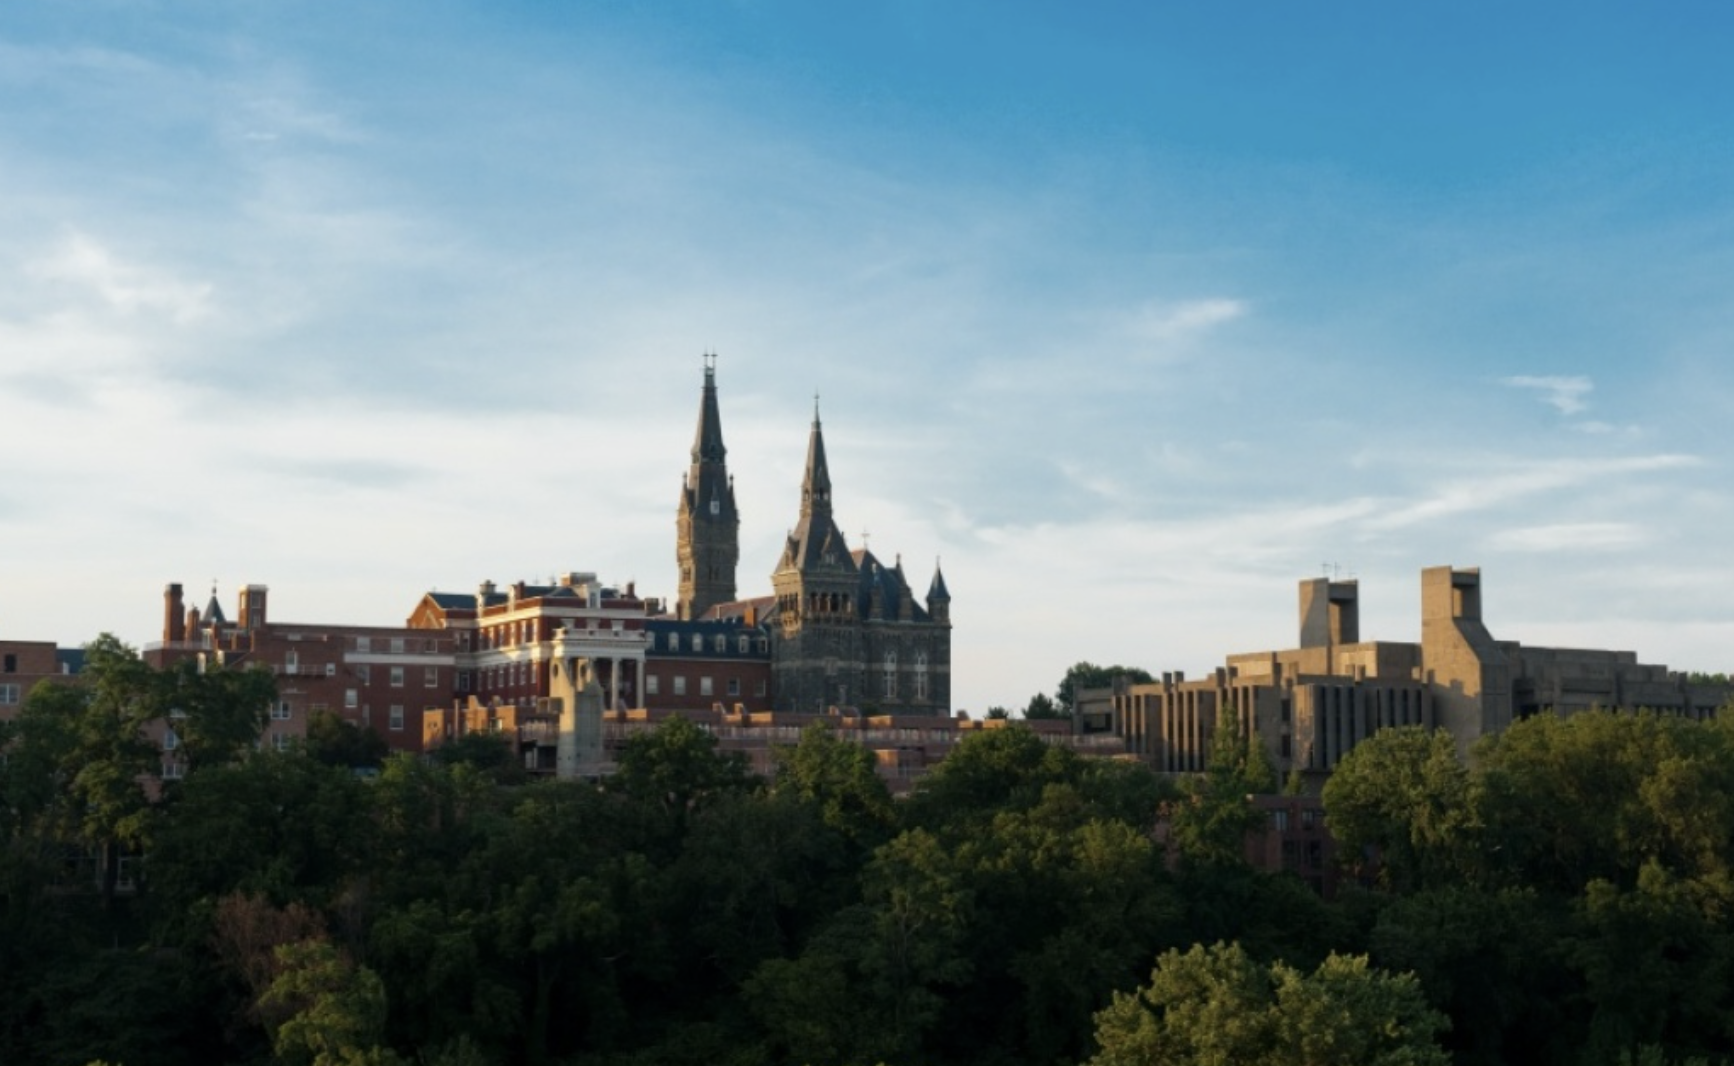 Exterior Image of Georgetown University - "The Hilltop"